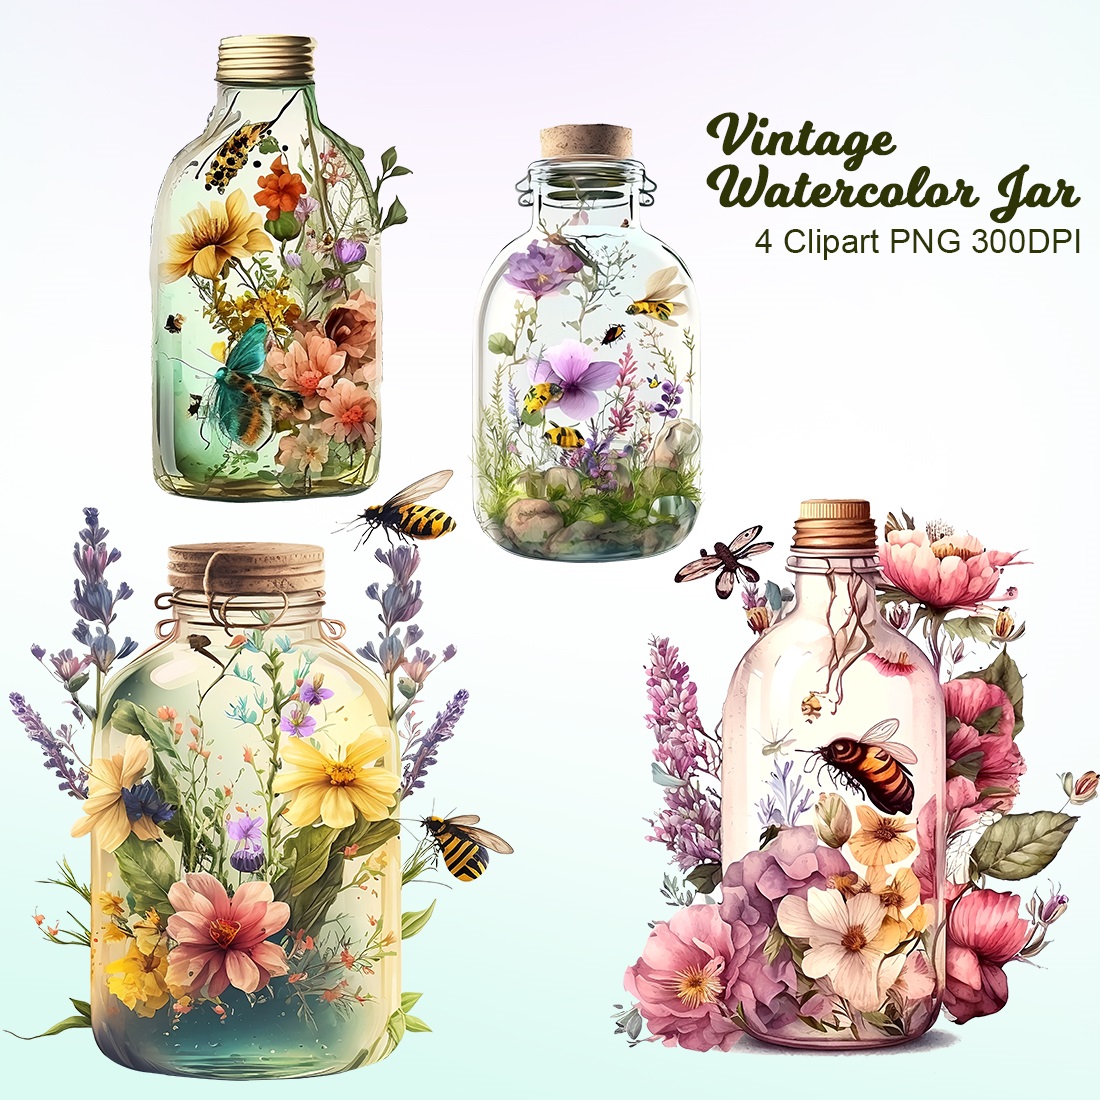 Beautiful Vintage Floral Watercolor Jar Clipart with transparent background cover image.